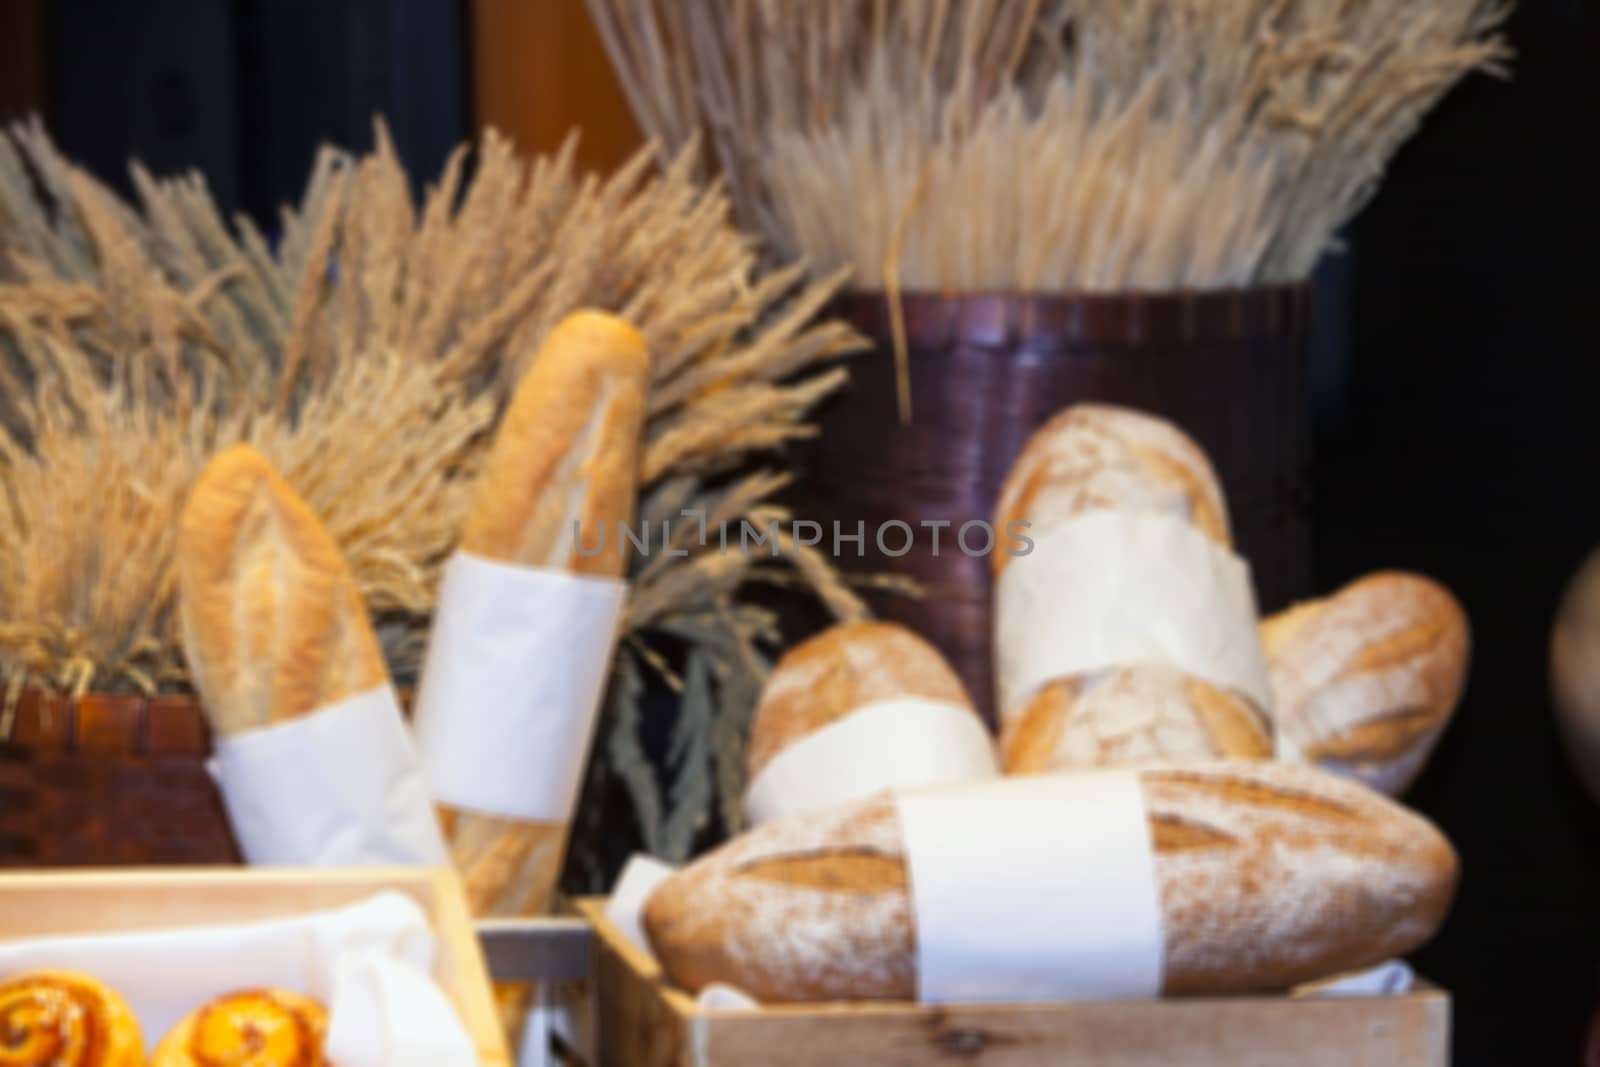 Bakery, two pieces is the staple food of the people and the background wheat,The background image blur.